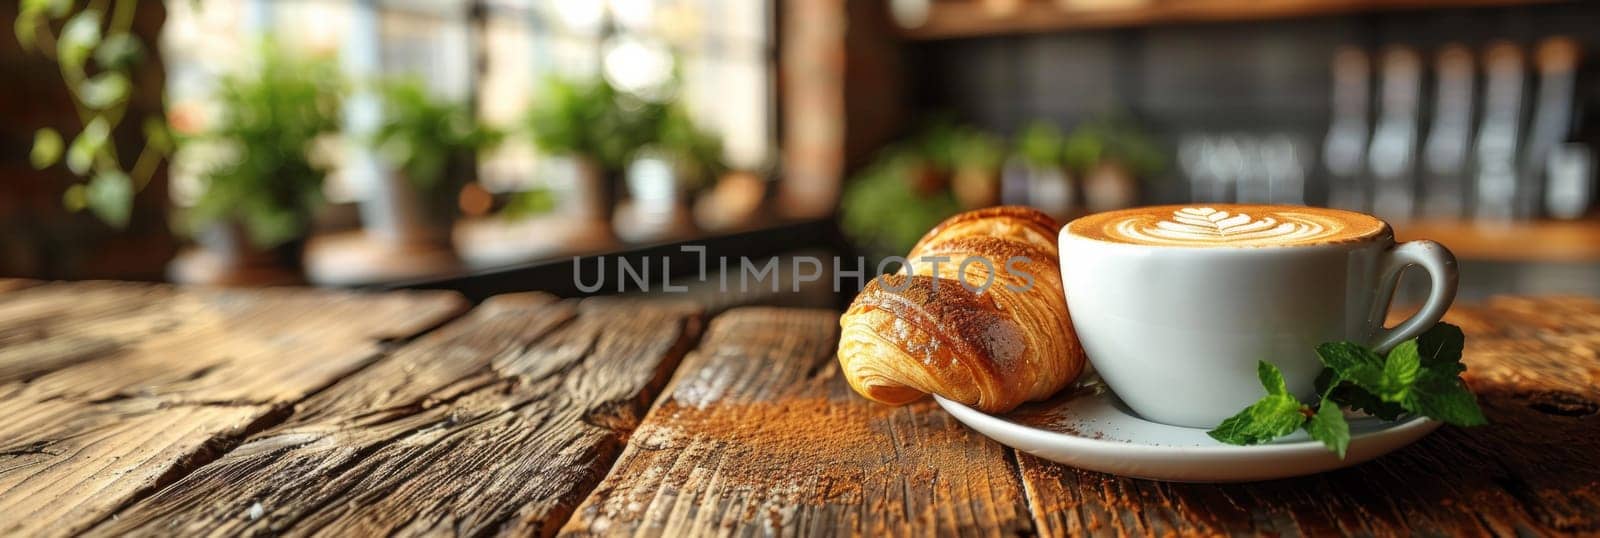 A cup of coffee and a croissant on top of the table